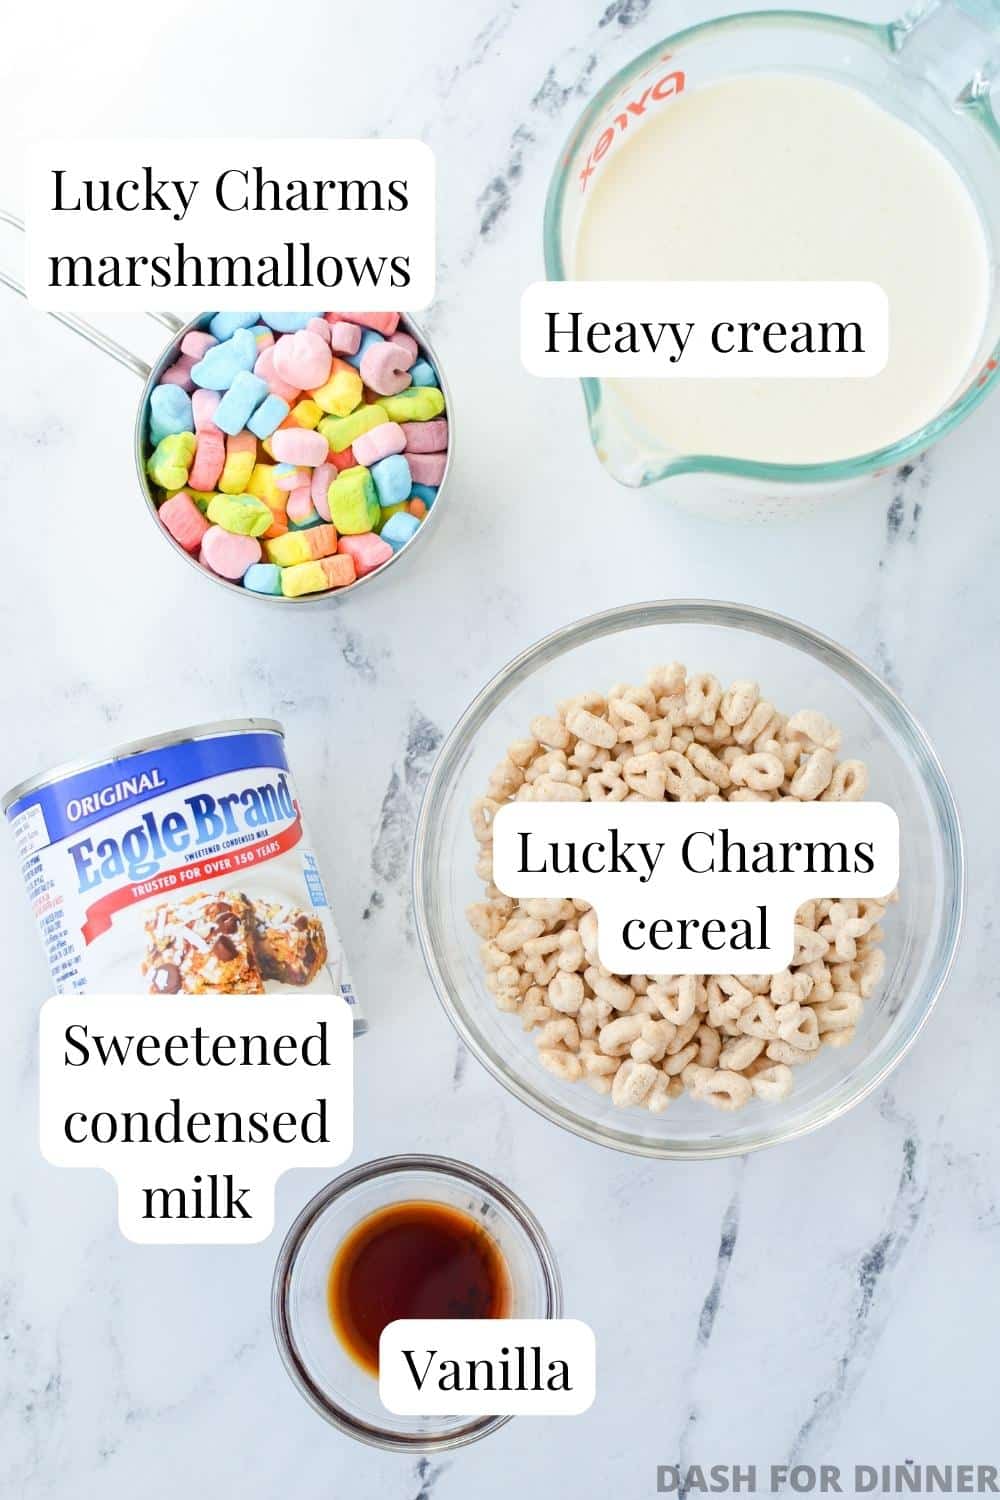 The ingredients needed to make lucky charms ice cream: cereal, heavy cream, sweetened condensed milk, and vanilla.